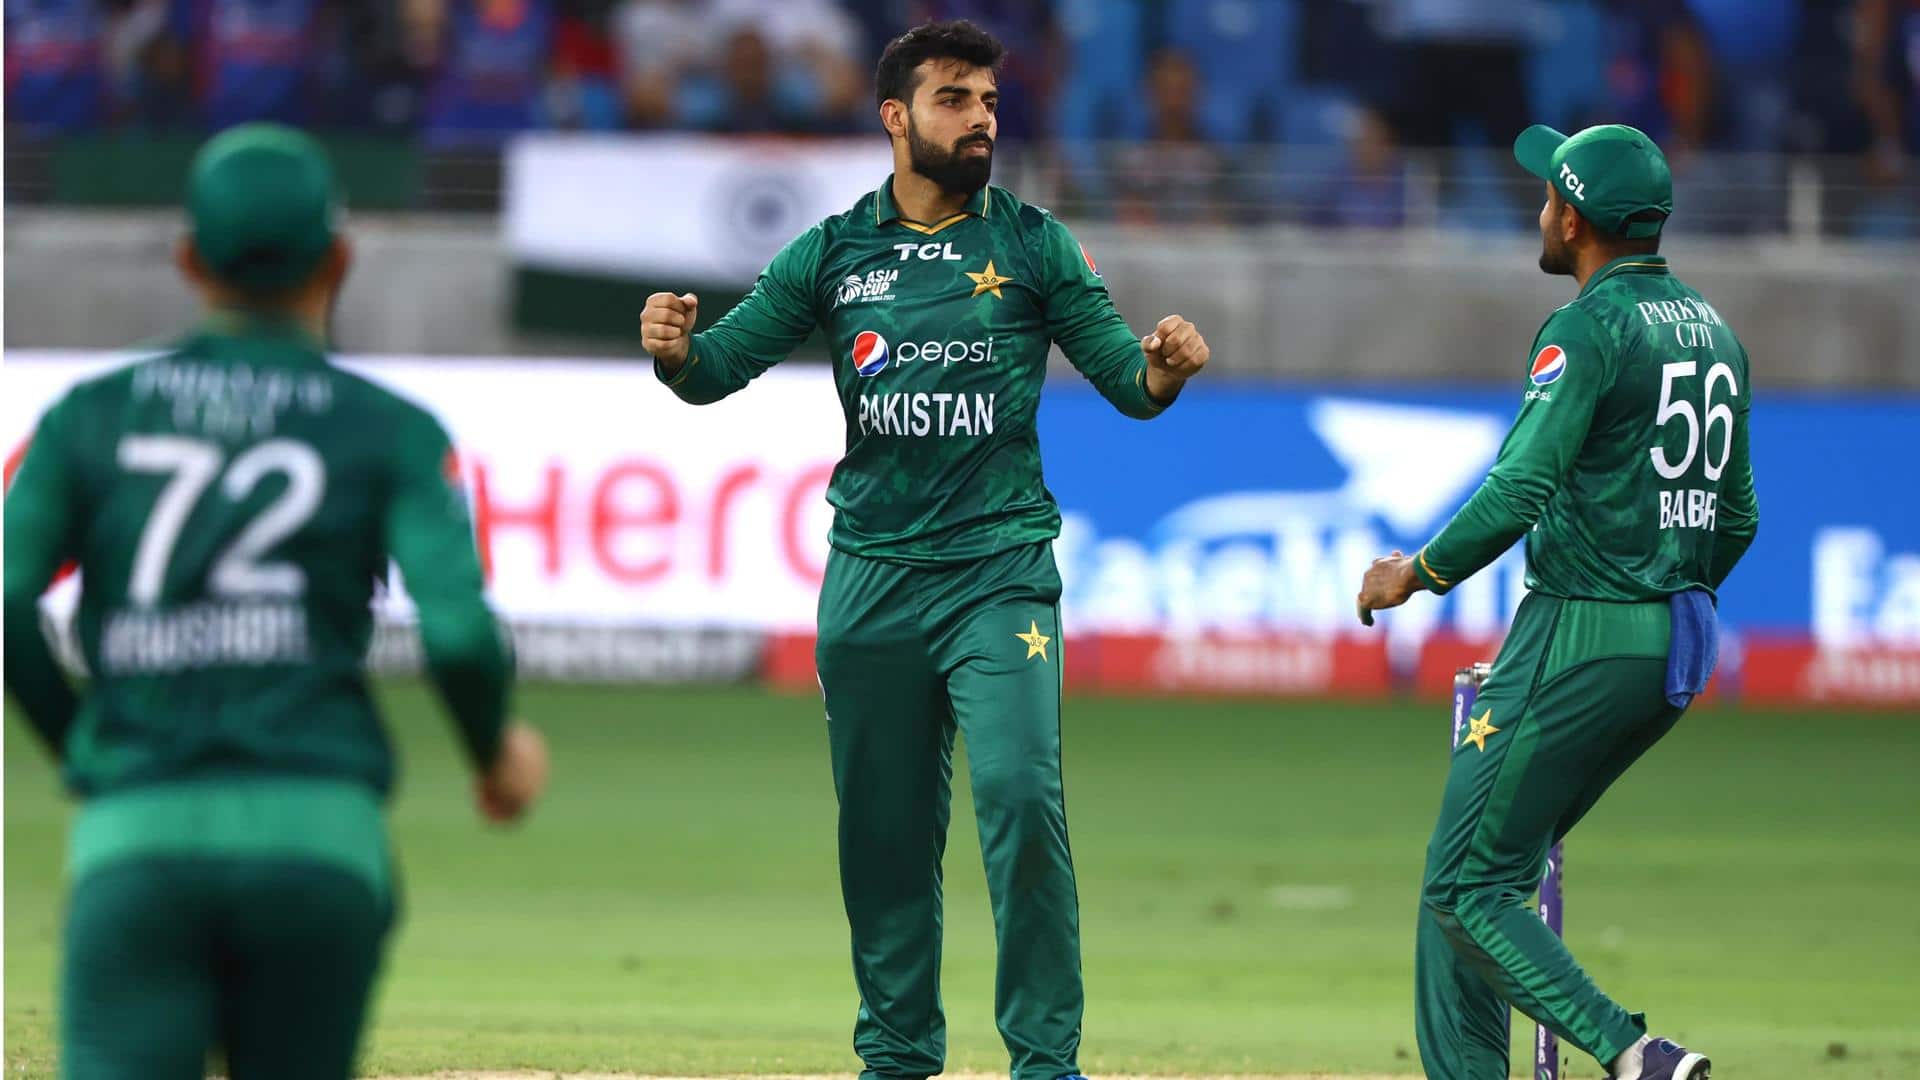 Shadab Khan becomes first Pakistan bowler with 100 T20I wickets